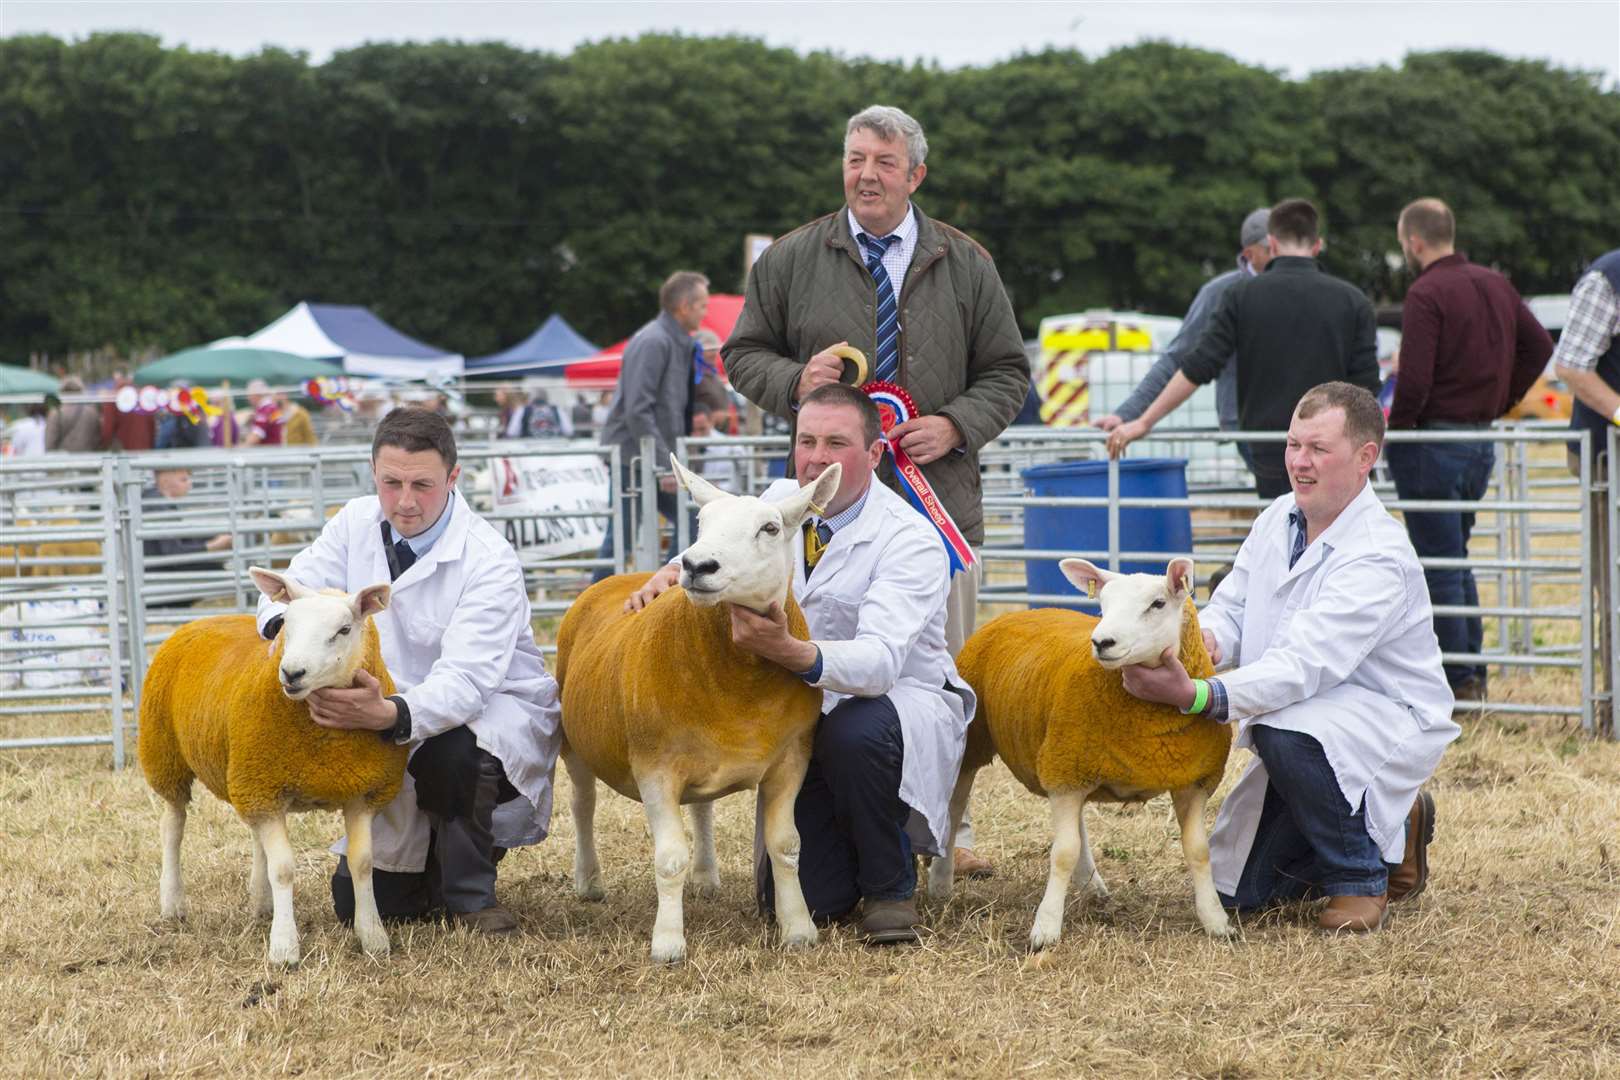 William Barnetson & Sons, Lynegar Farm, Watten, took the supreme sheep championship and the reserve champion of champions award with their commercial sheep champions, a four-crop three-quarters Texel cross half-bred ewe with her twin Texel cross lambs, after an Annan tup. Holding the champions are (from left) William and James Barnetson and Stuart Mackay, while looking on is William Barnetson Snr. Picture: Robert MacDonald / Northern Studios